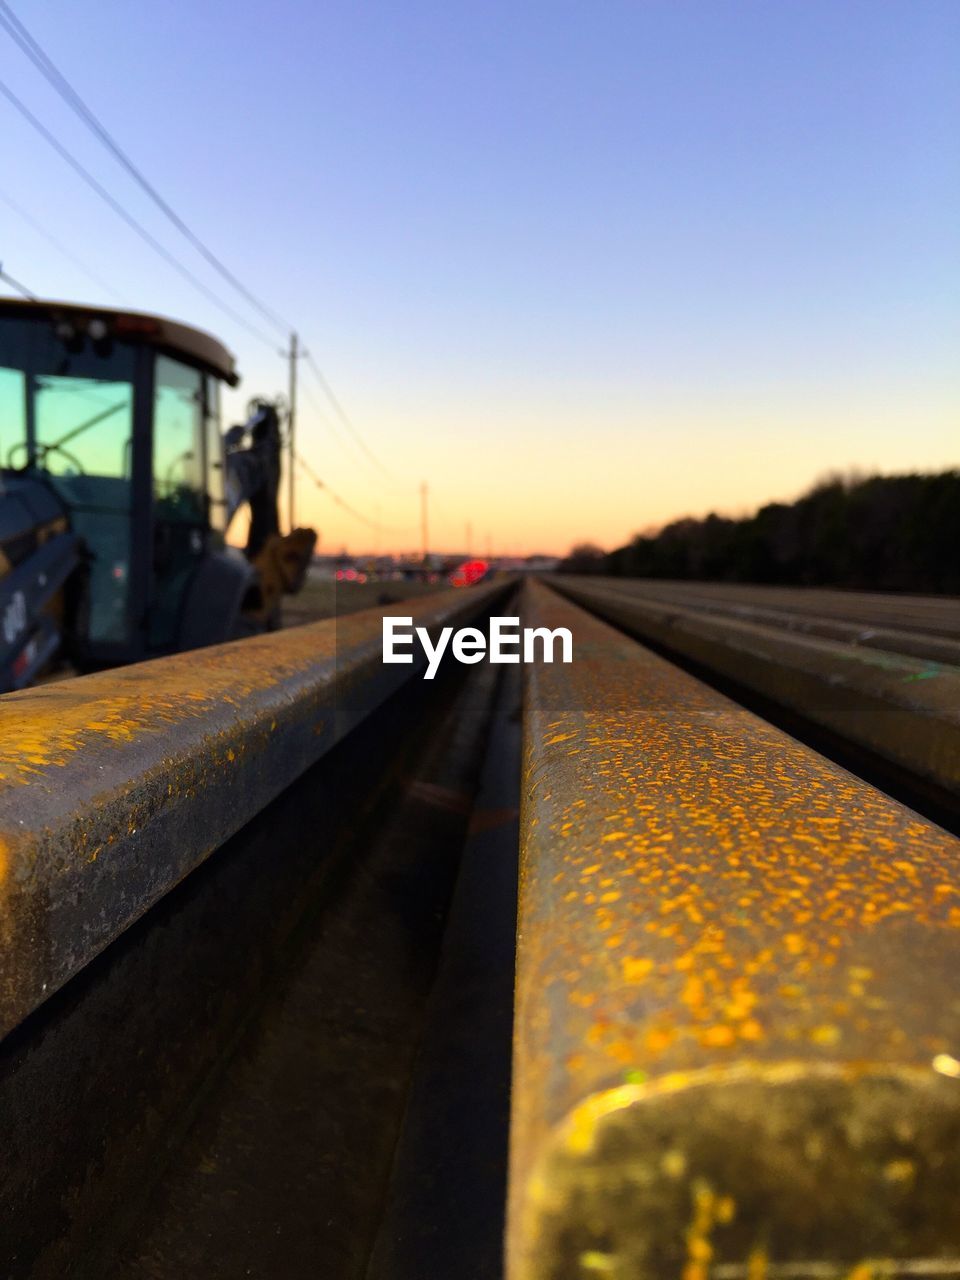 Railroad track against sky during sunset